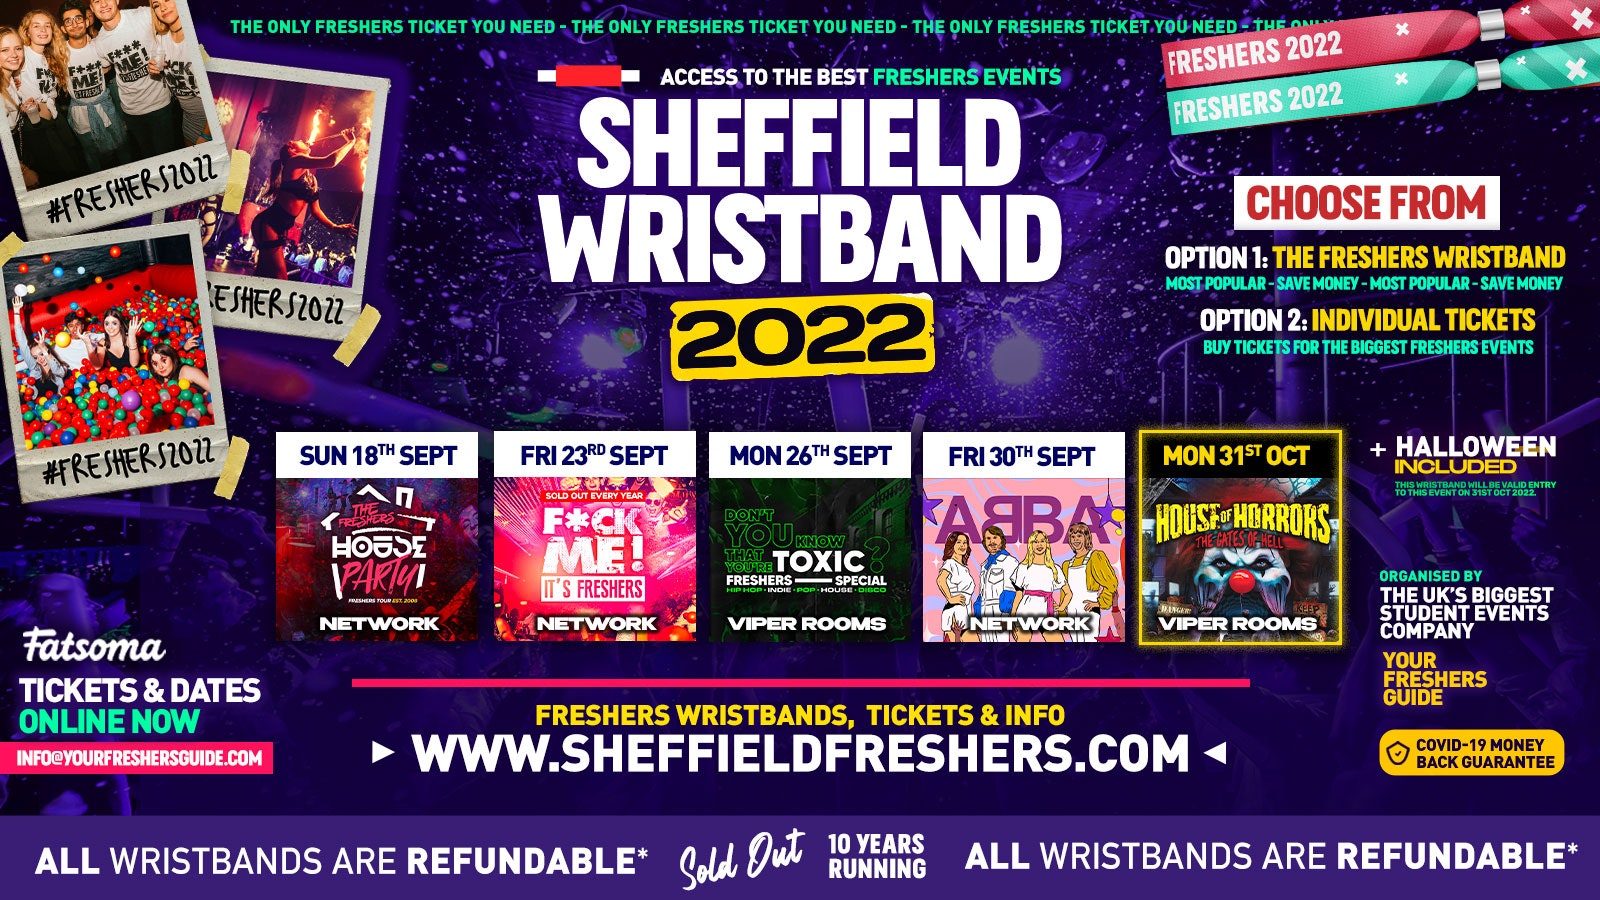 Sheffield Freshers Wristband 2022 – The BIGGEST Events in Sheffield BEST Clubs | Sheffield Freshers 2022 – 5 Events for £10!